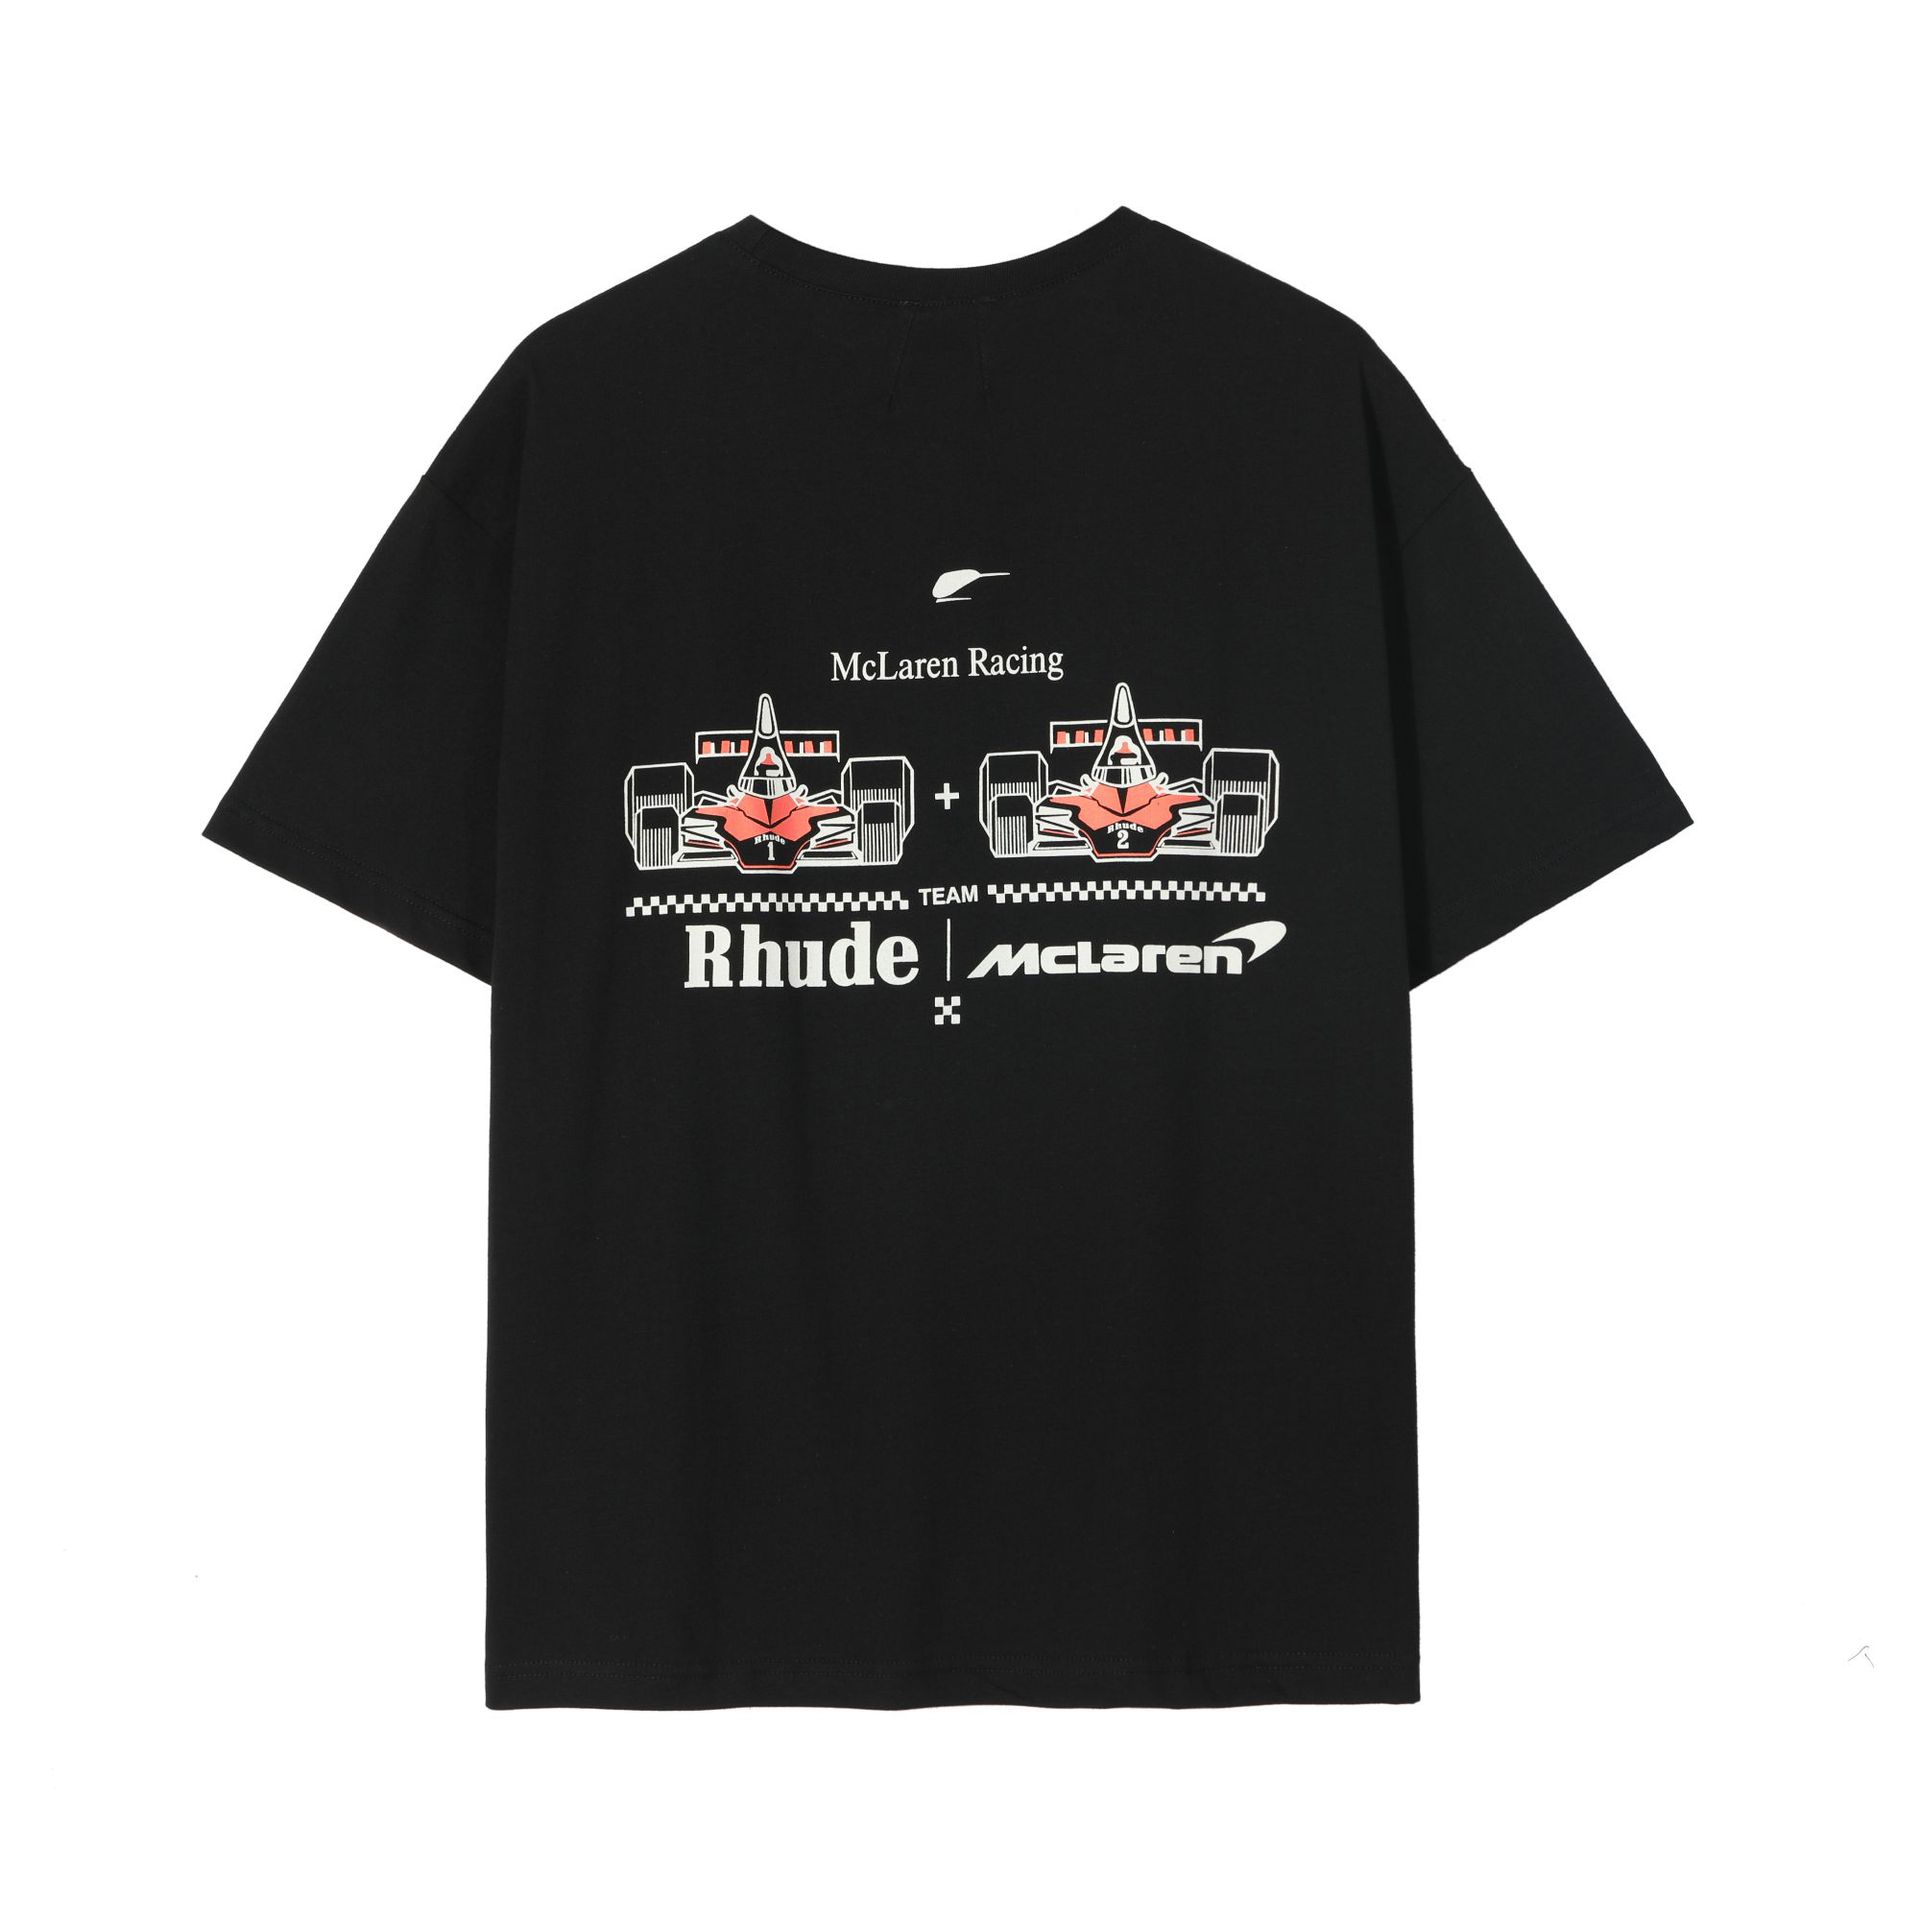 Heren t-shirts zomer rhude tshir oversized zware stoffen paar extra grote shirs voor dames heren shir kwalitaire man rhude ee us size